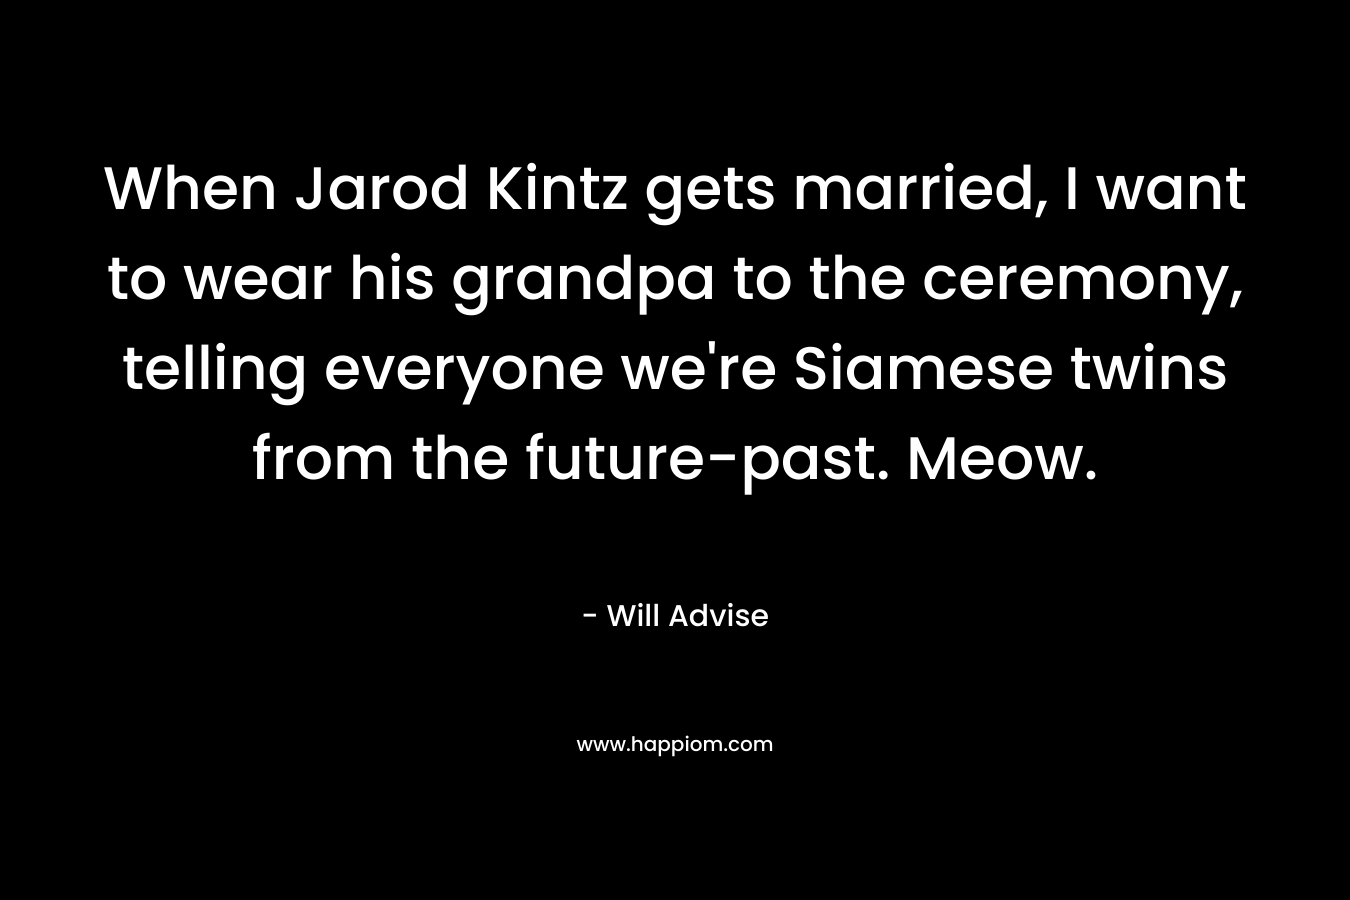 When Jarod Kintz gets married, I want to wear his grandpa to the ceremony, telling everyone we're Siamese twins from the future-past. Meow.